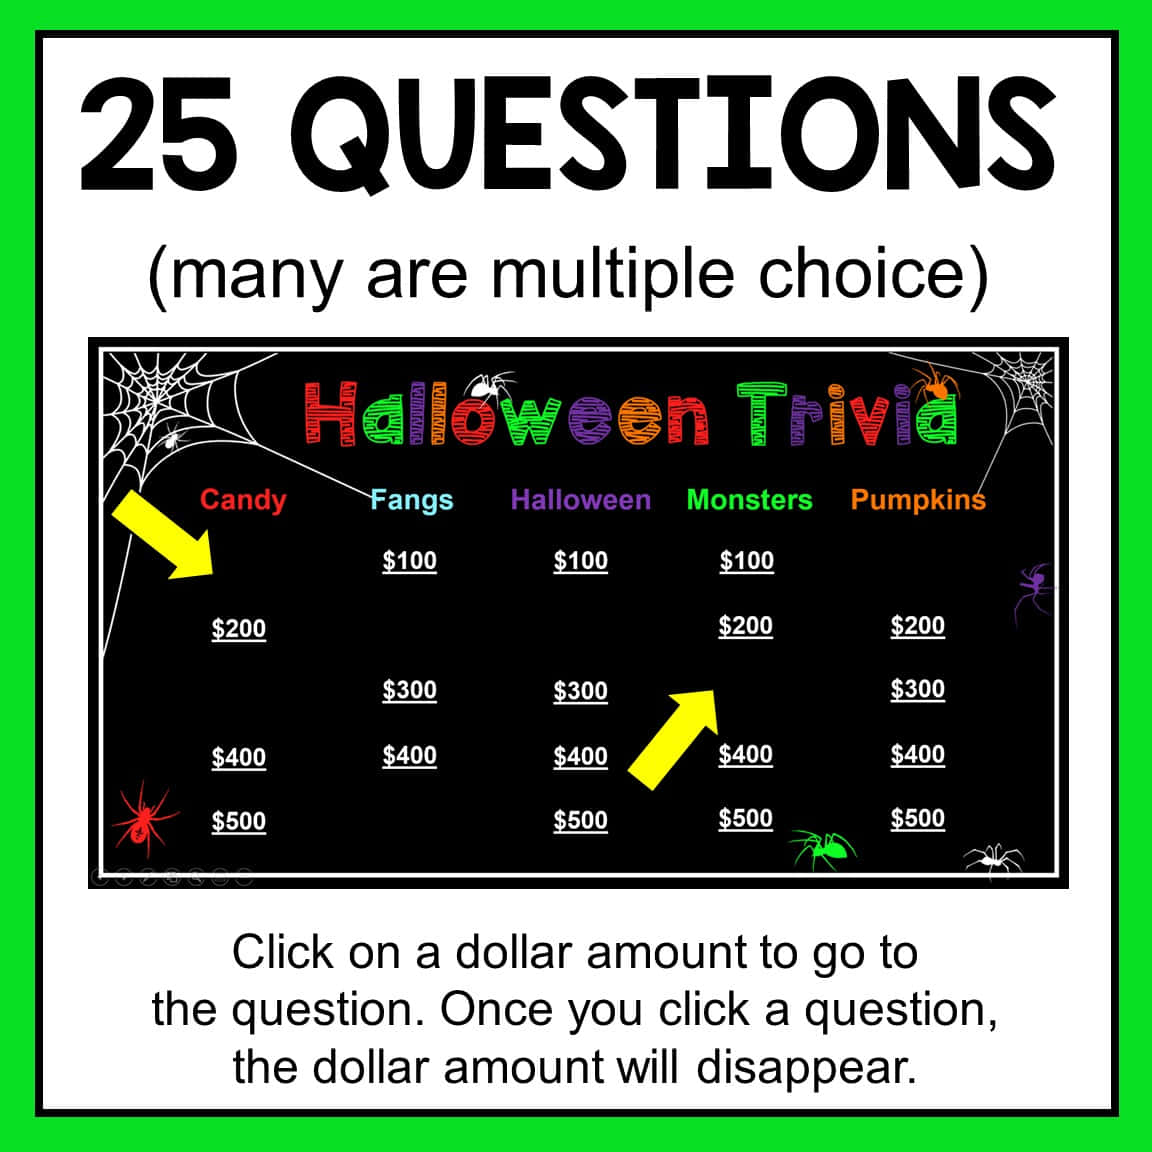 Test your knowledge of spooky Halloween trivia! Wallpaper